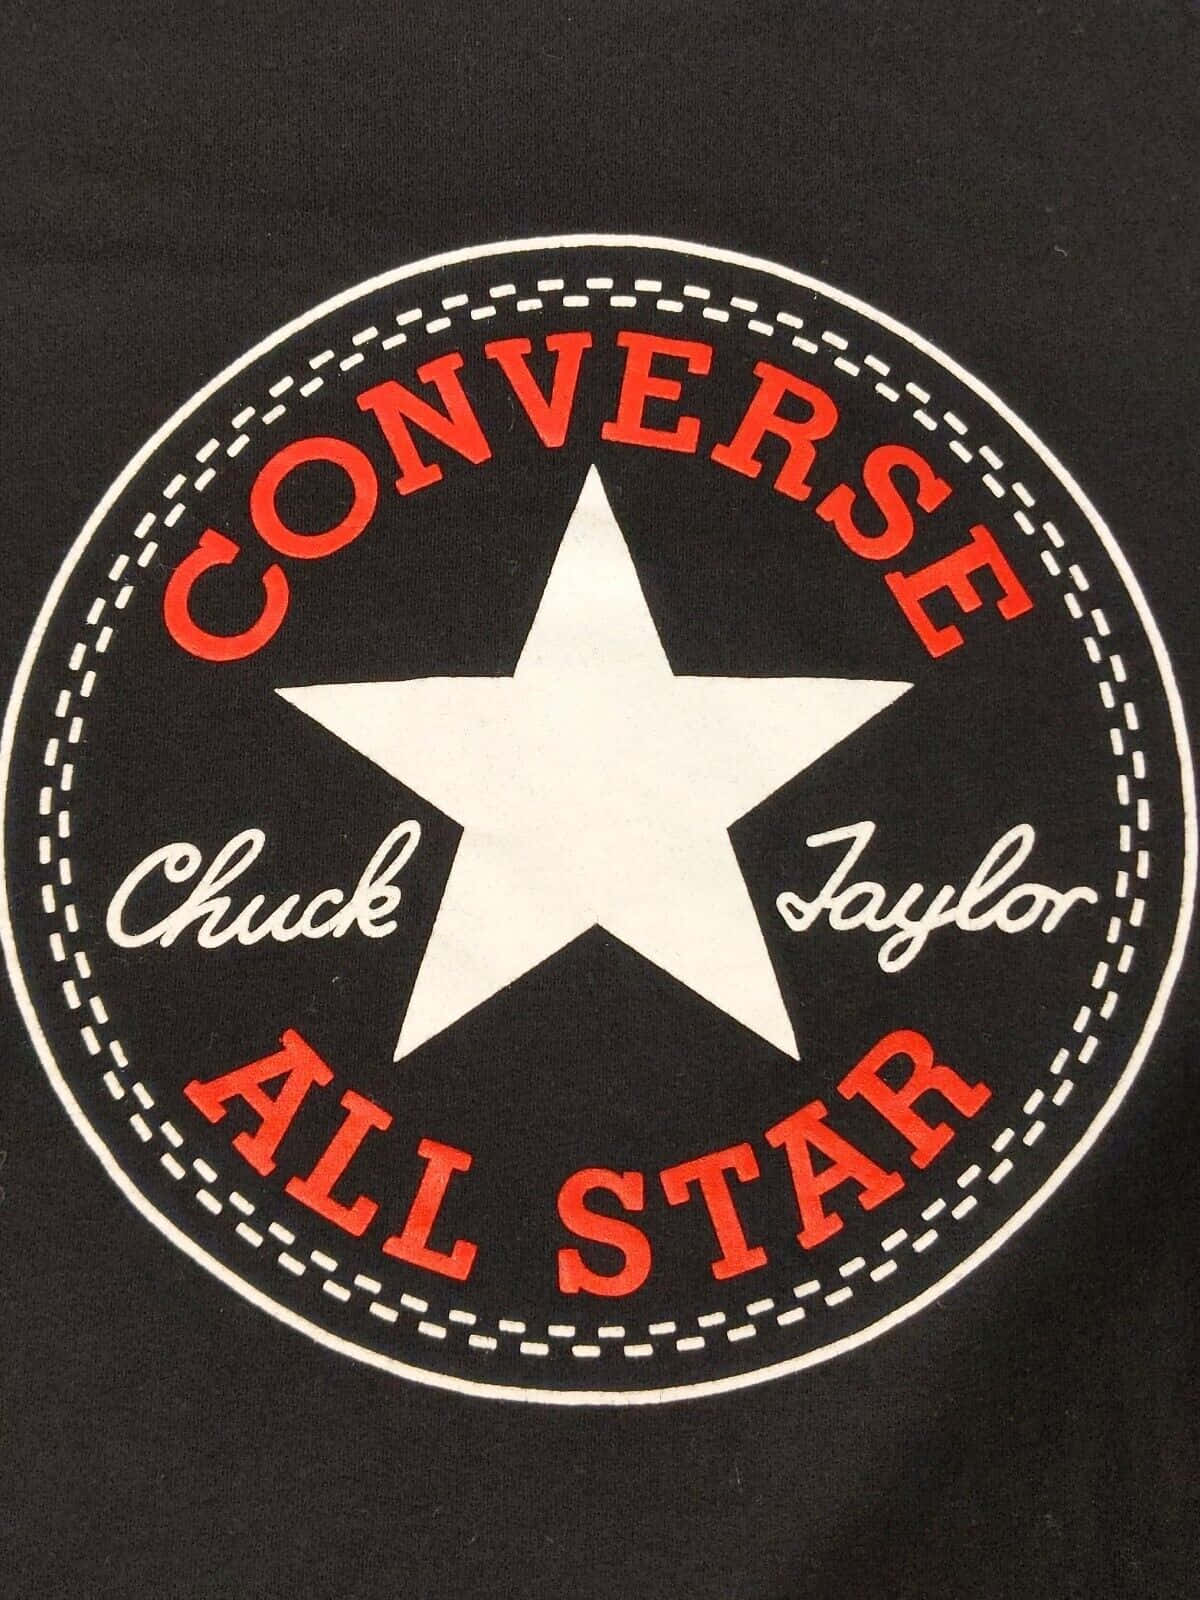 Download Converse Pictures | Wallpapers.com